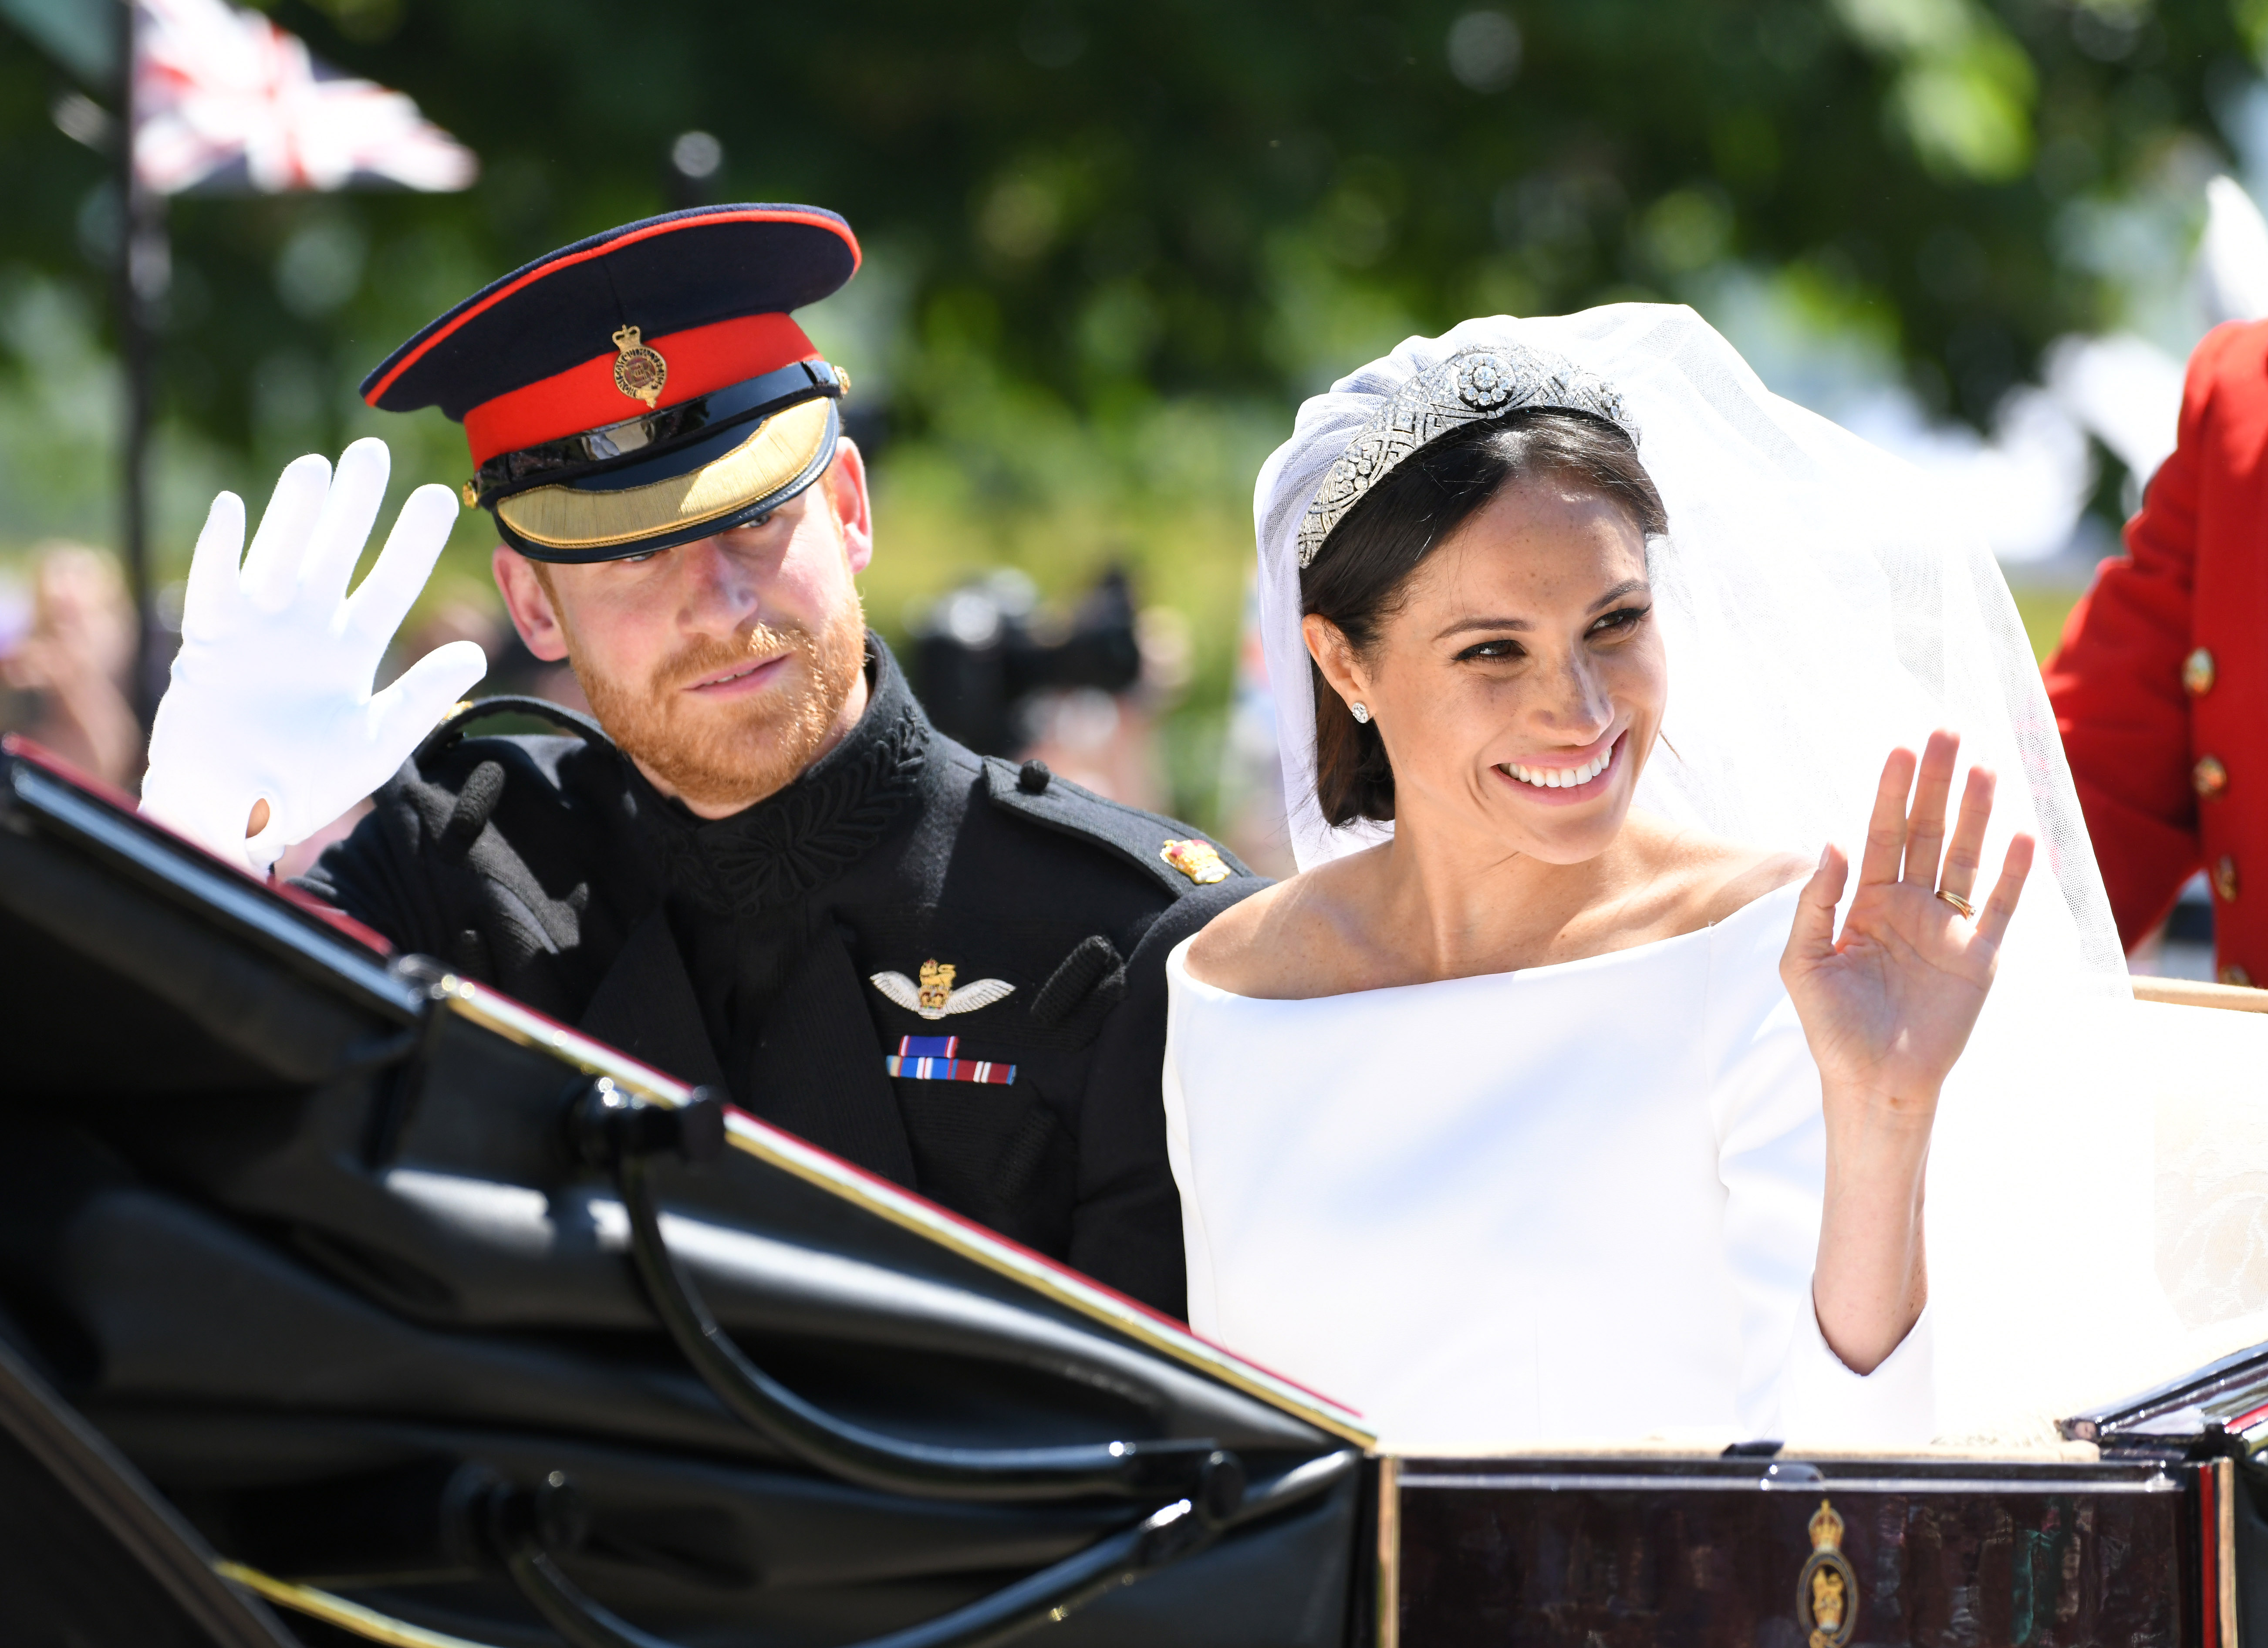 Prince Harry and Meghan Markle leave Windsor Castle in a carriage after their wedding at St George's Chapel on May 19, 2018. | Source: Getty Images